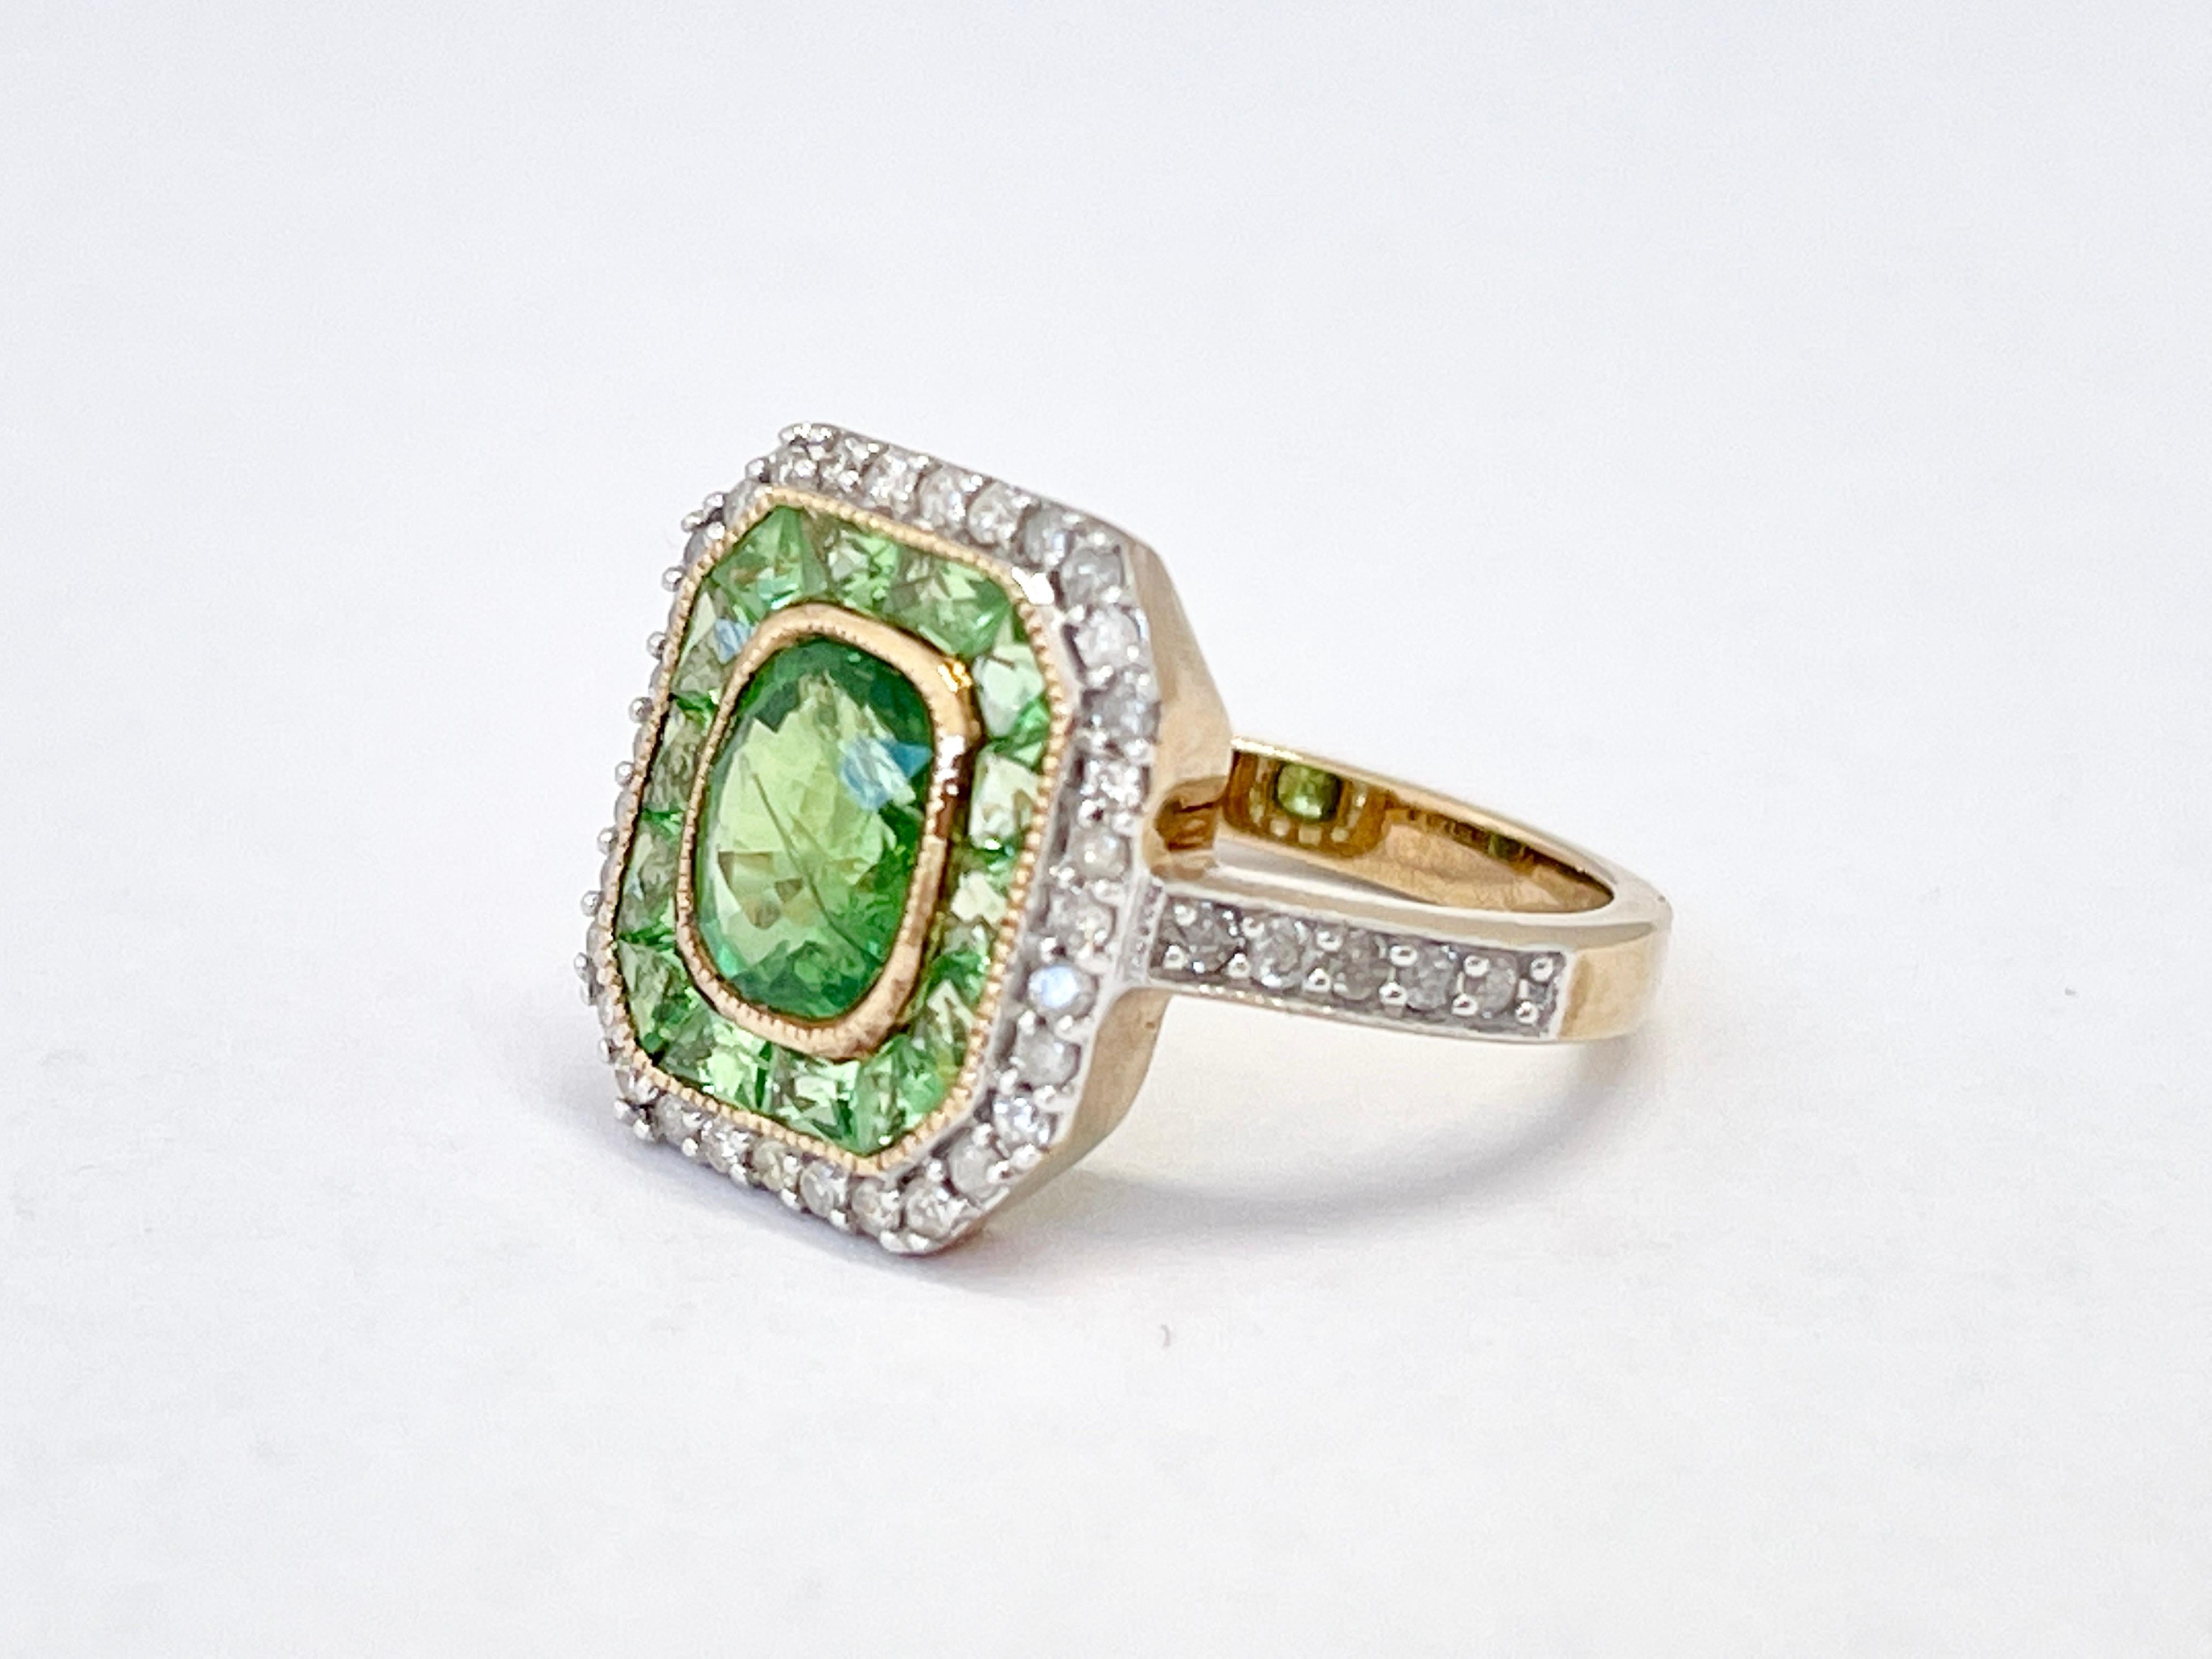 Presenting this intricately designed dress ring.

It features a 1.08ct natural, Tsavorite Garnet that is graded 'medium green'.  Surrounding the centre stone is a row of French Cut Tsavorites that replicate the 'Art Deco' style.  Surrounding the